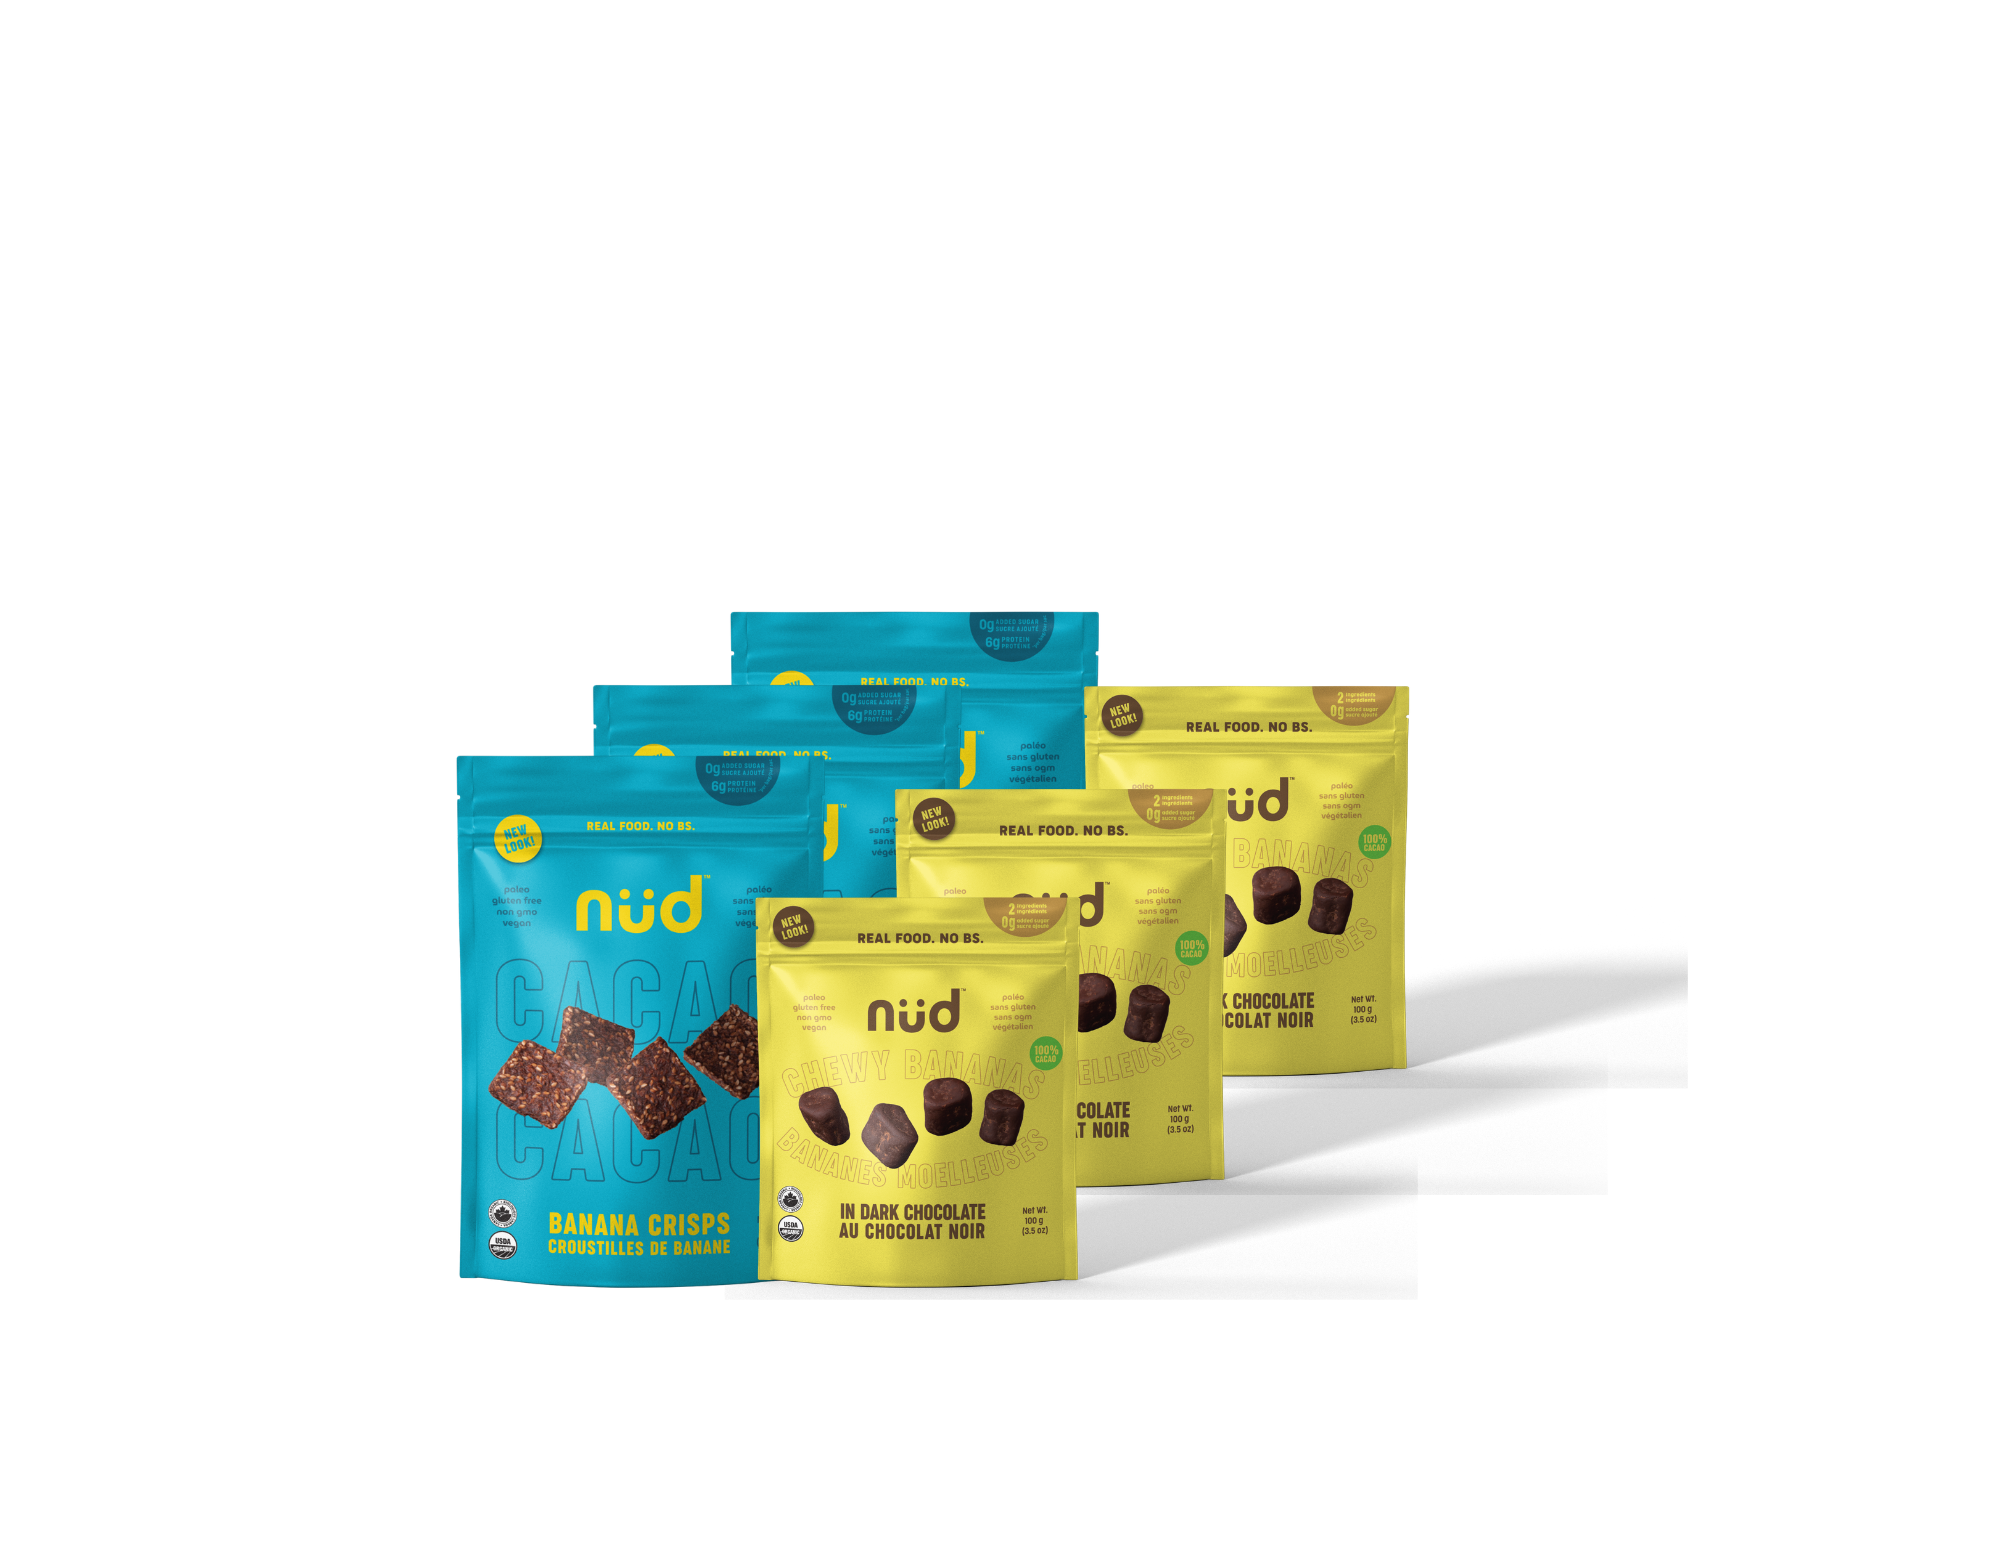 Sugar-free chocolate & banana heaven! This bundle features 3 packs of Choc. Covered Chewy Bananas & 3 packs of Cacao Banana Crisps (all organic, sugar-free). Guilt-free snacking starts here! Shop now!